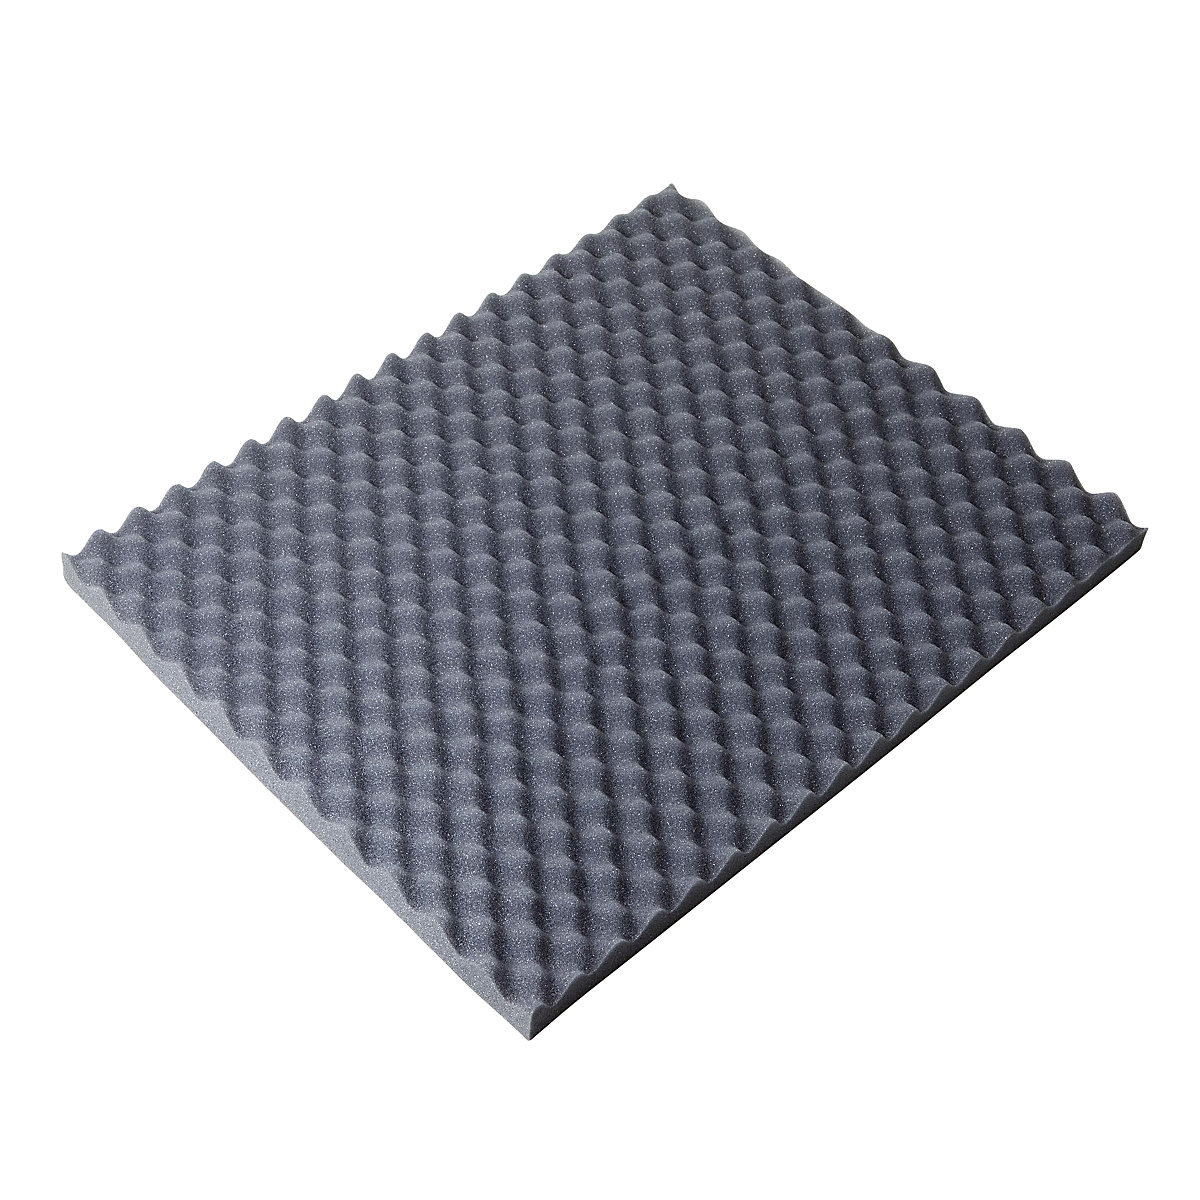 Egg crate foam sheet, 30 mm thick, LxW 500 x 400 mm, pack of 26-6